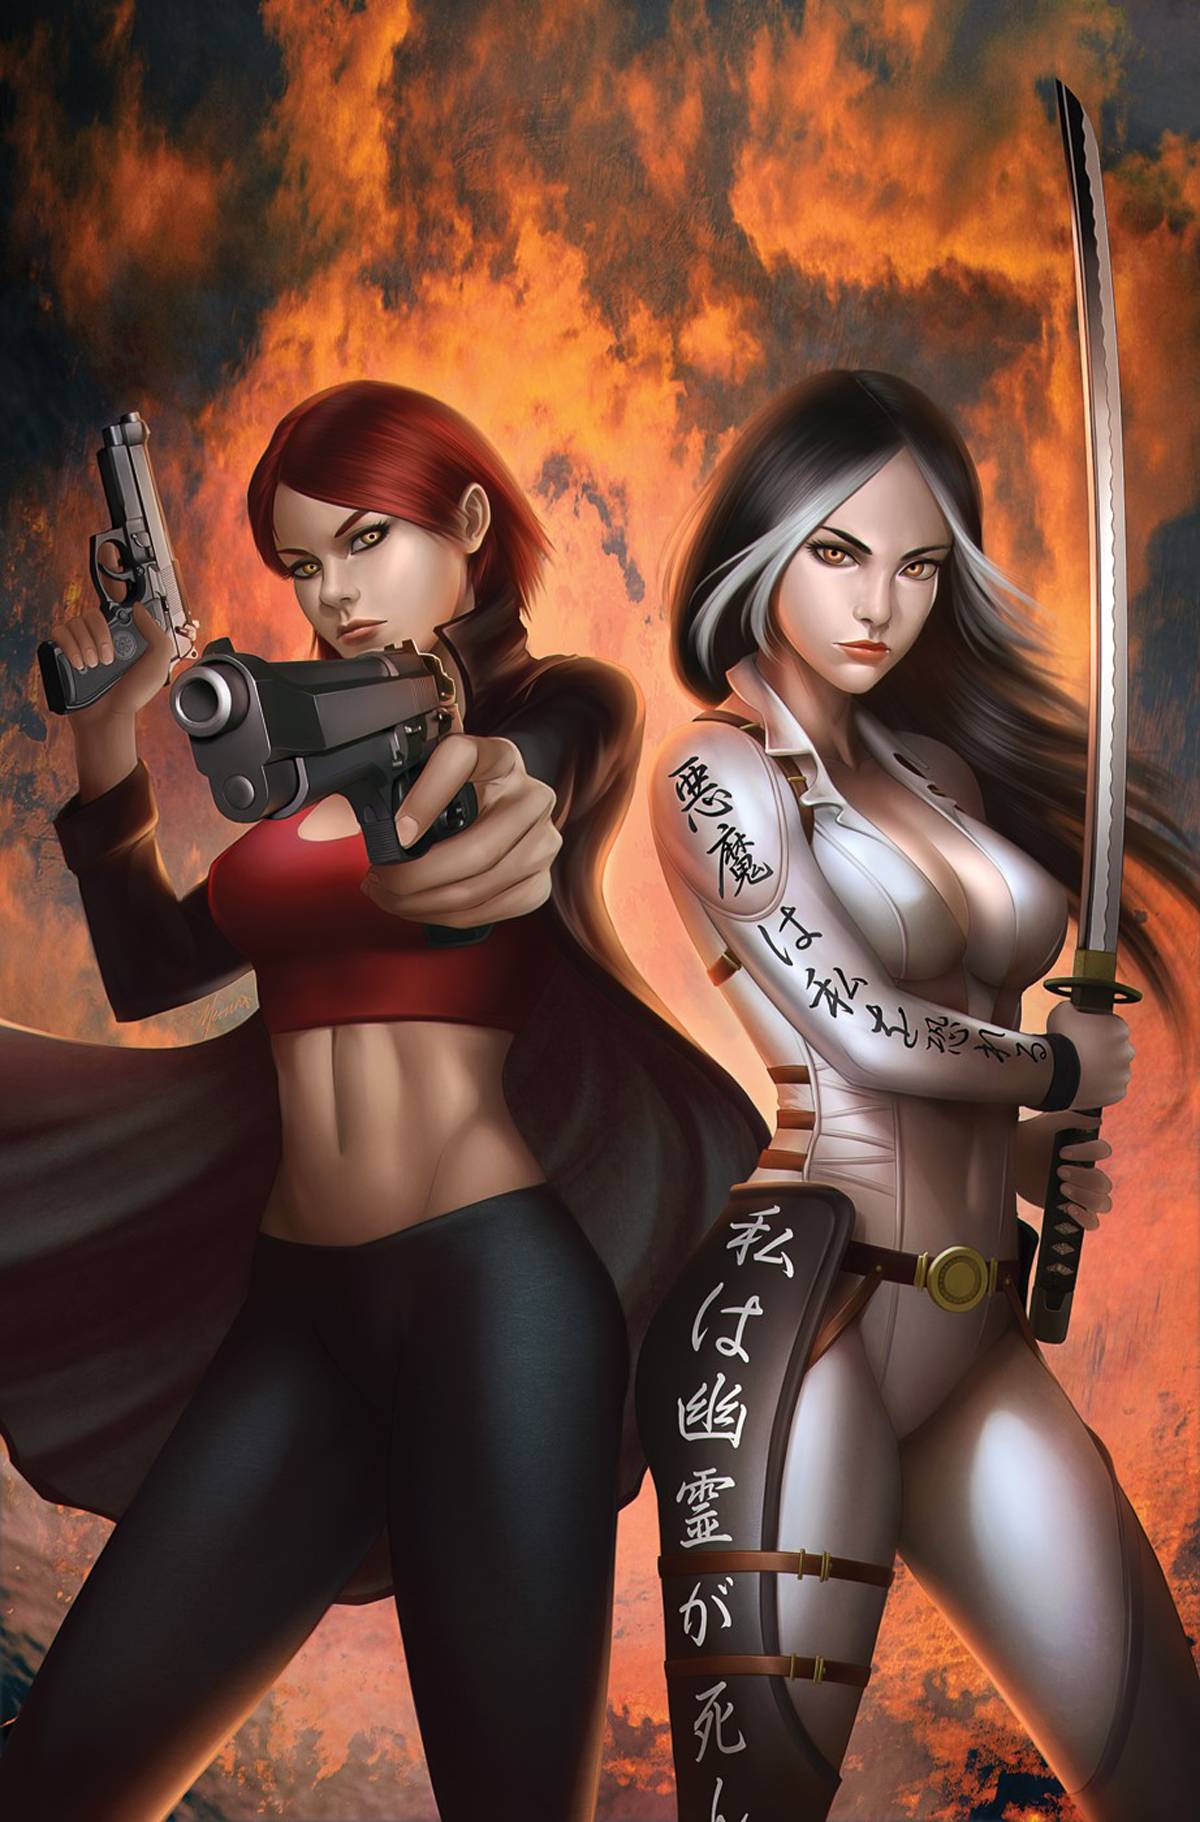 Grimm Fairy Tales: Inferno #4